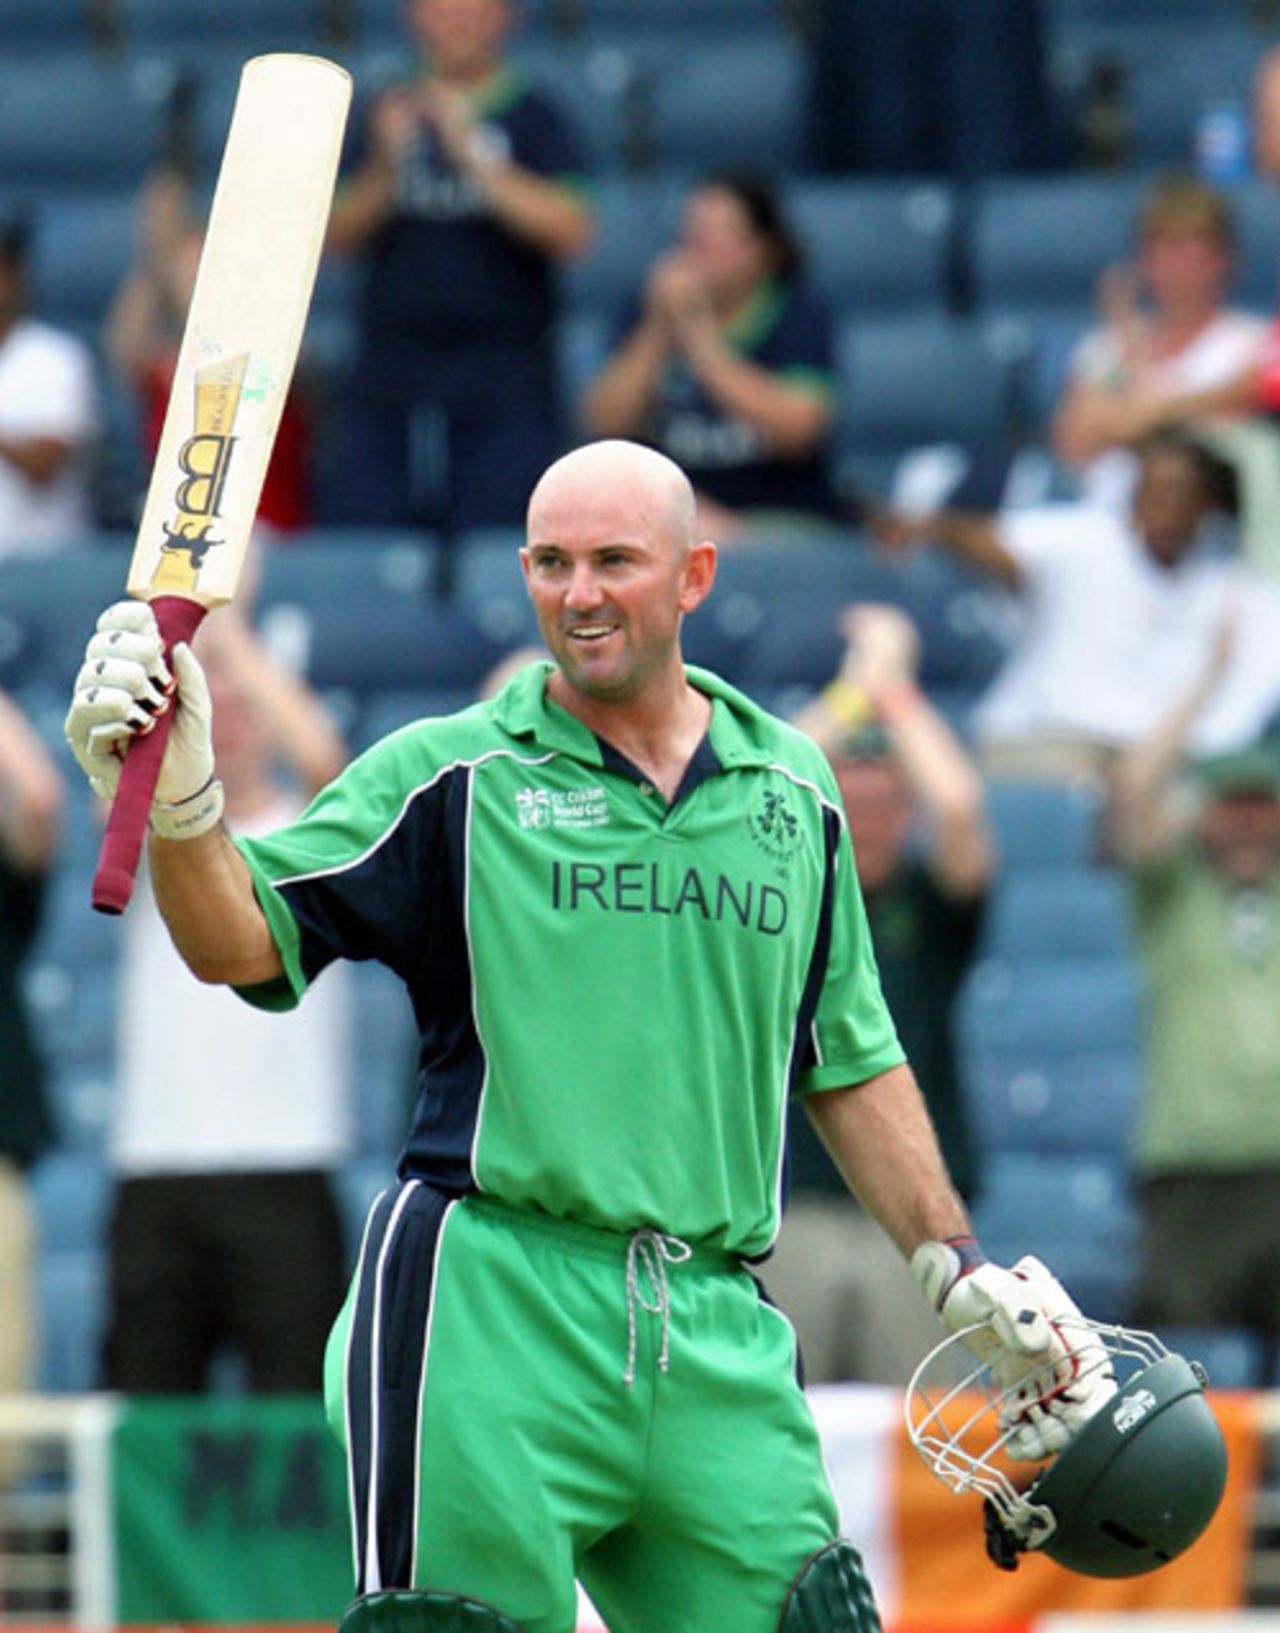 Jeremy Bray raises his bat to acknowledge the cheers of the crowd after he reached his century, Ireland v Zimbabwe, Group D, Jamaica, March 15, 2007